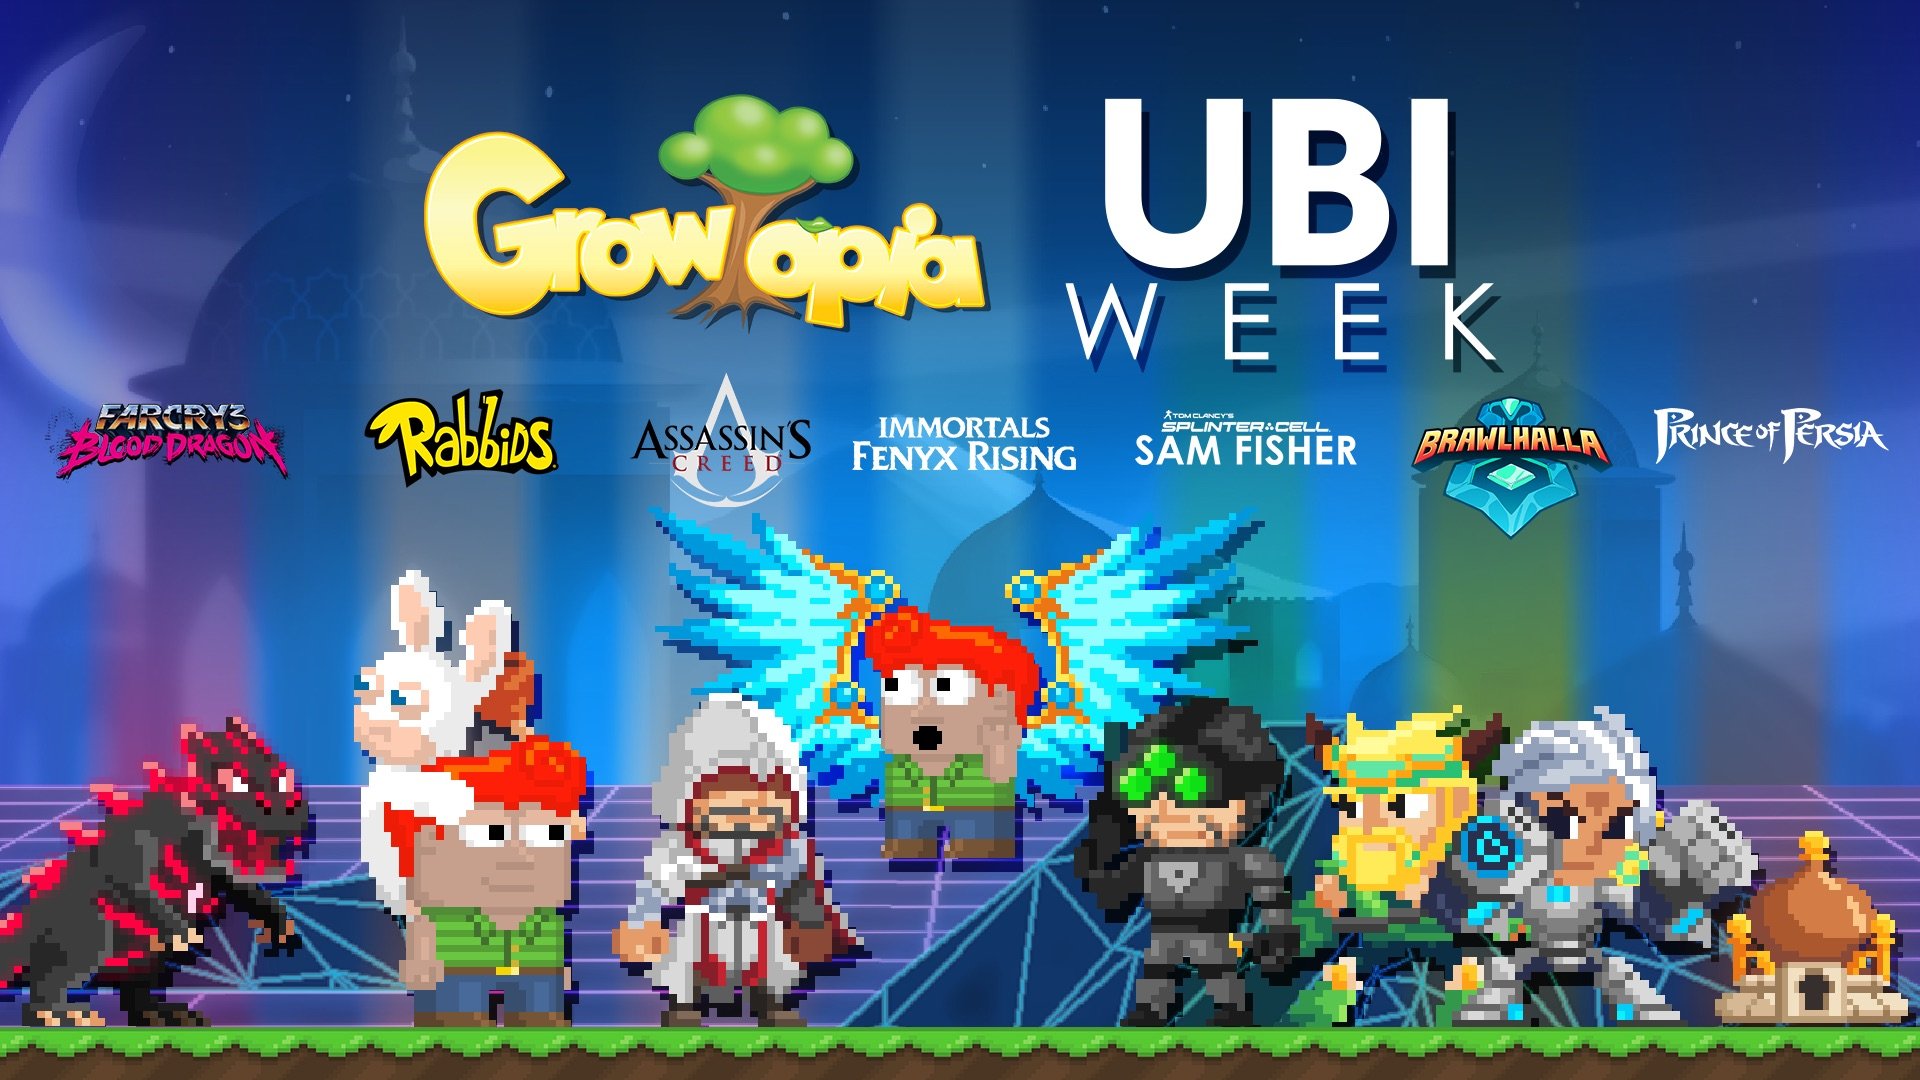 Sandbox MMO Growtopia Will Host Ezio, Rabbids, And More In January Crossover Event thumbnail